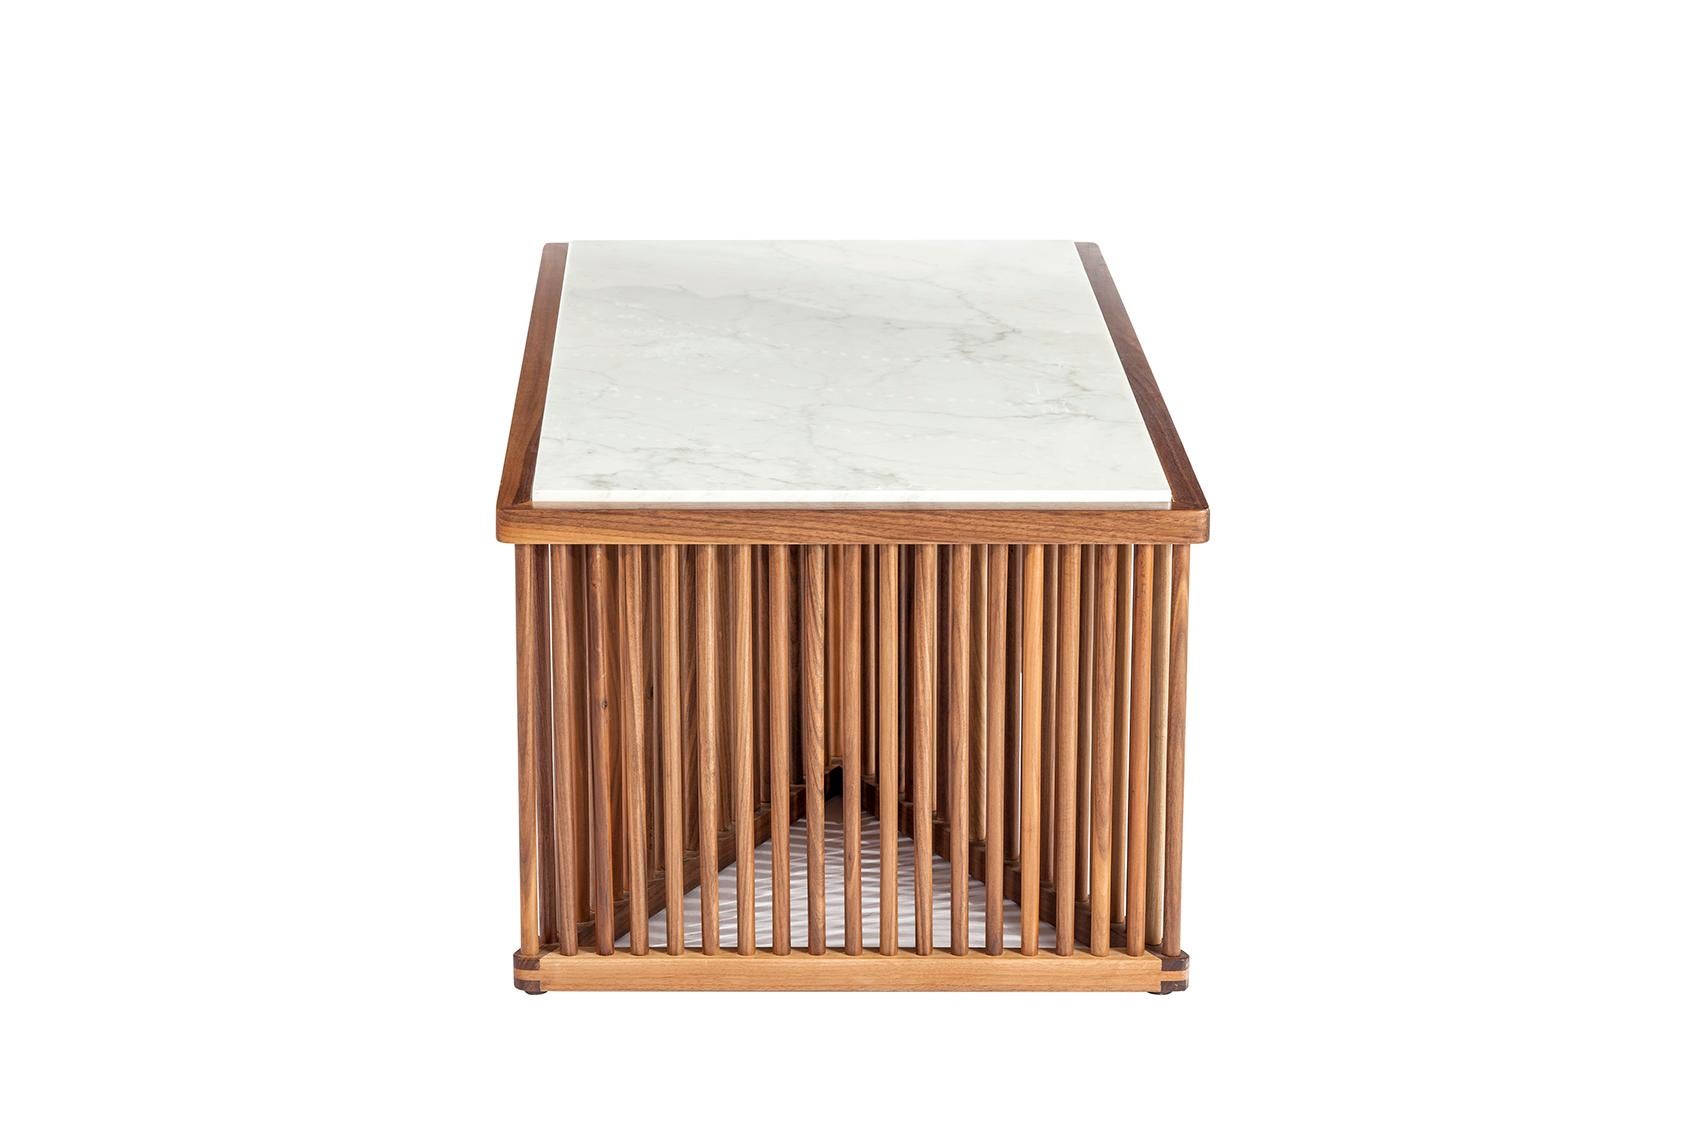 Walnut Cage Table, Mid-Century Modern Center or Coffee Table For Sale